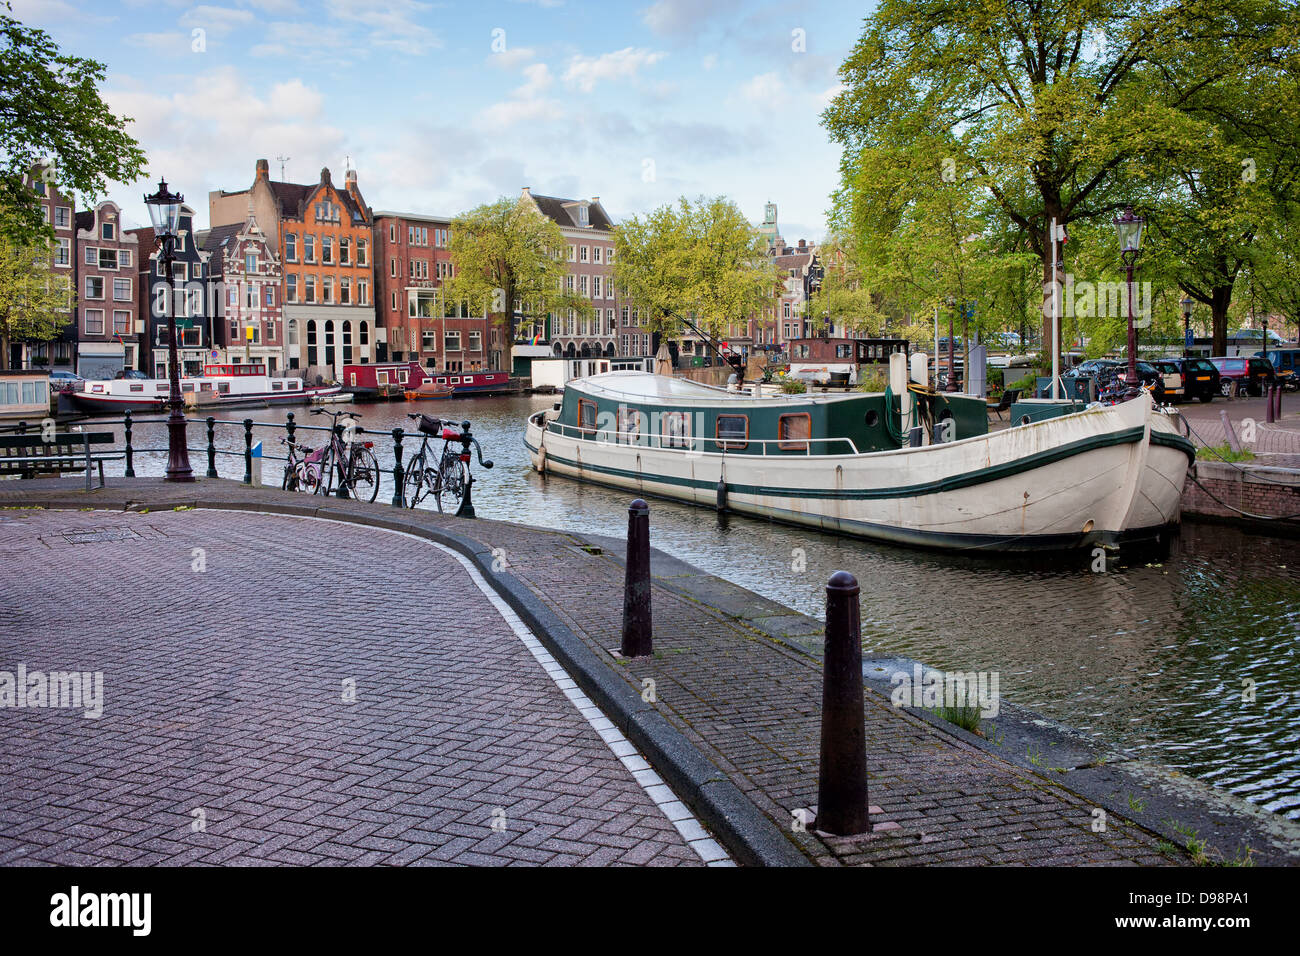 City of Amsterdam cityscape, houseboats on Groenburgwal canal and Amstel river, Netherlands, North Holland province. Stock Photo